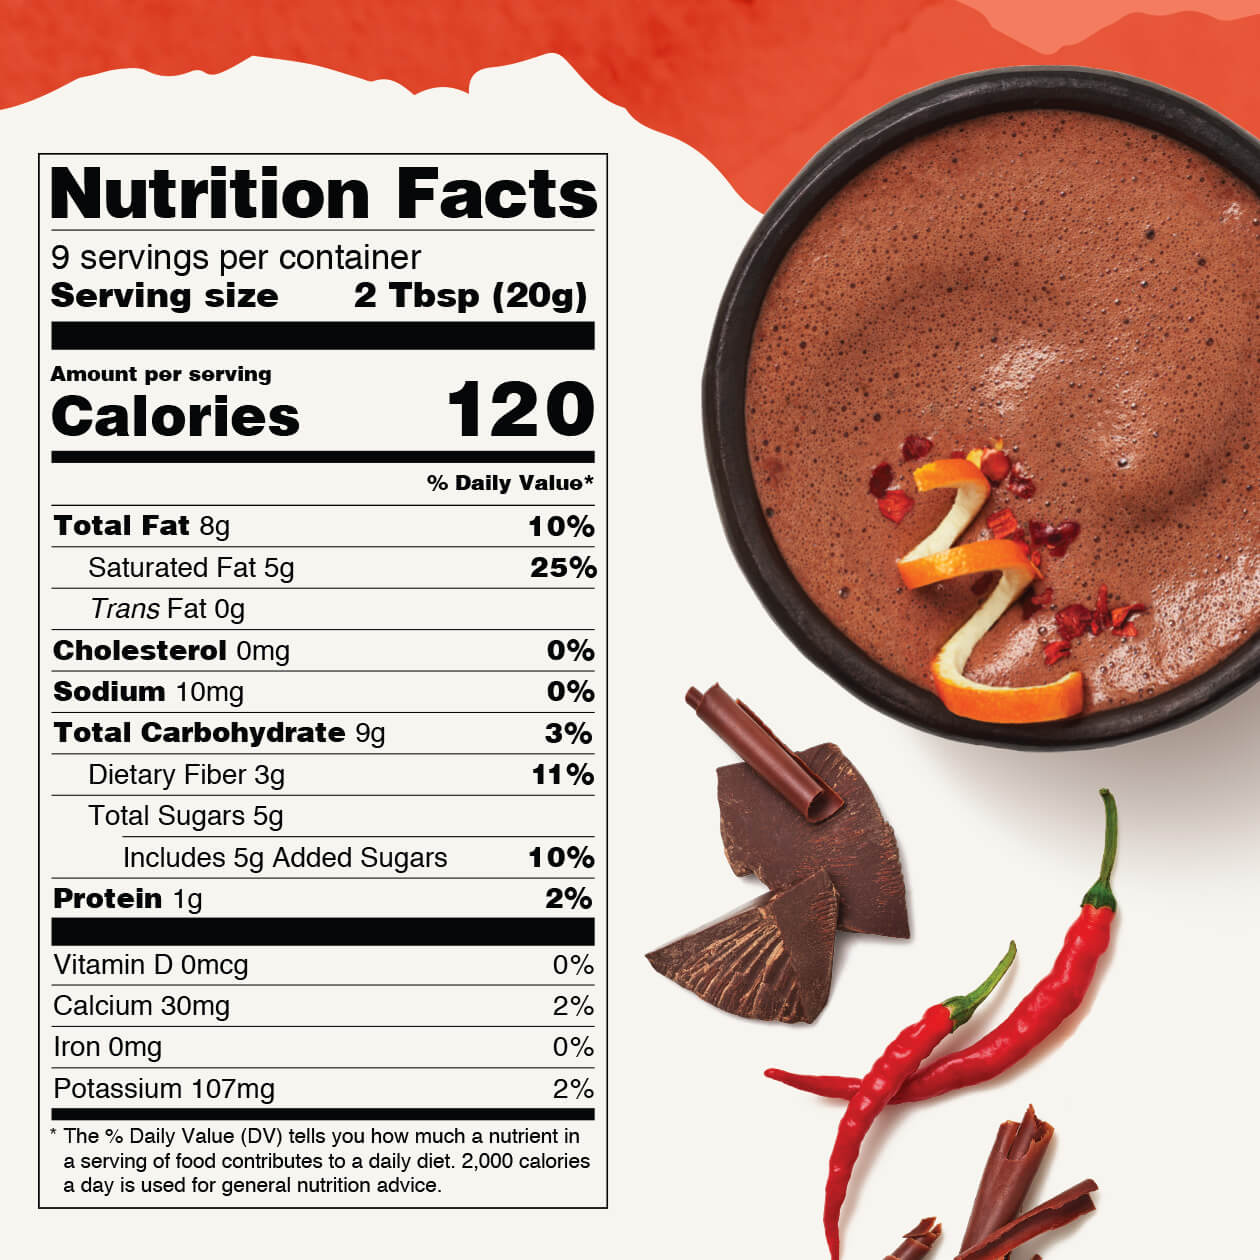 Nutrition Facts for Numi's organic Touch of Chili Drinking Chocolate